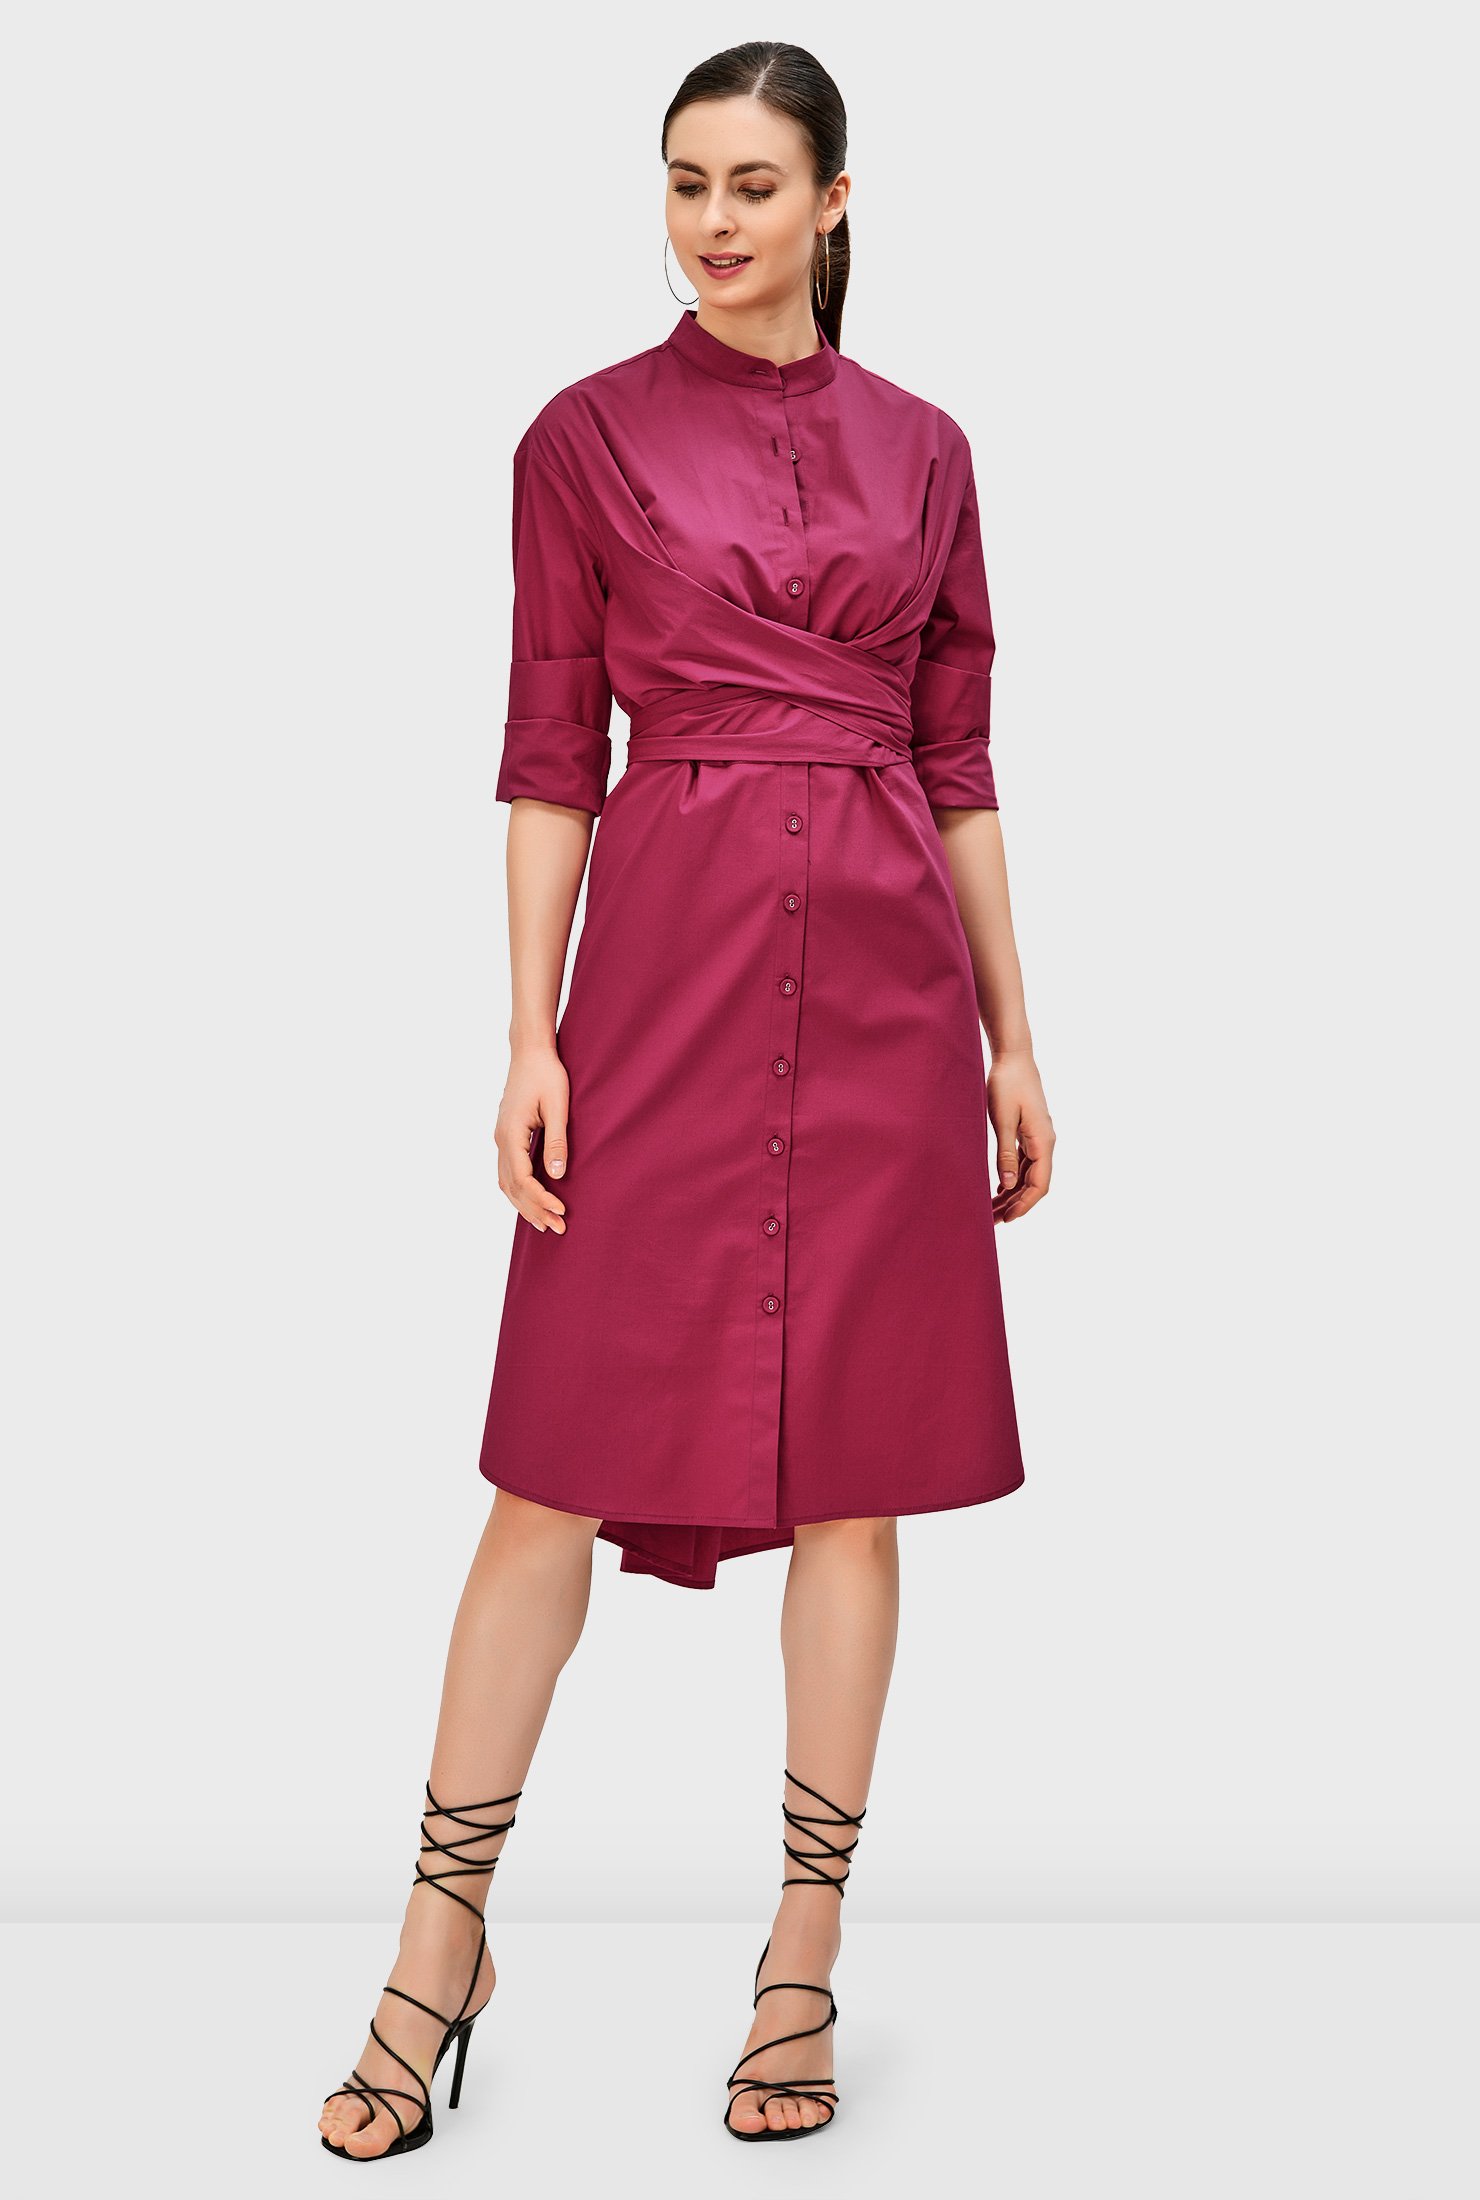 A vented high-low shirttail hem adds a bit of swing to our crisp cotton poplin shirt dress cinched in with pleated sash-ties crossed at the front and tied at the back.